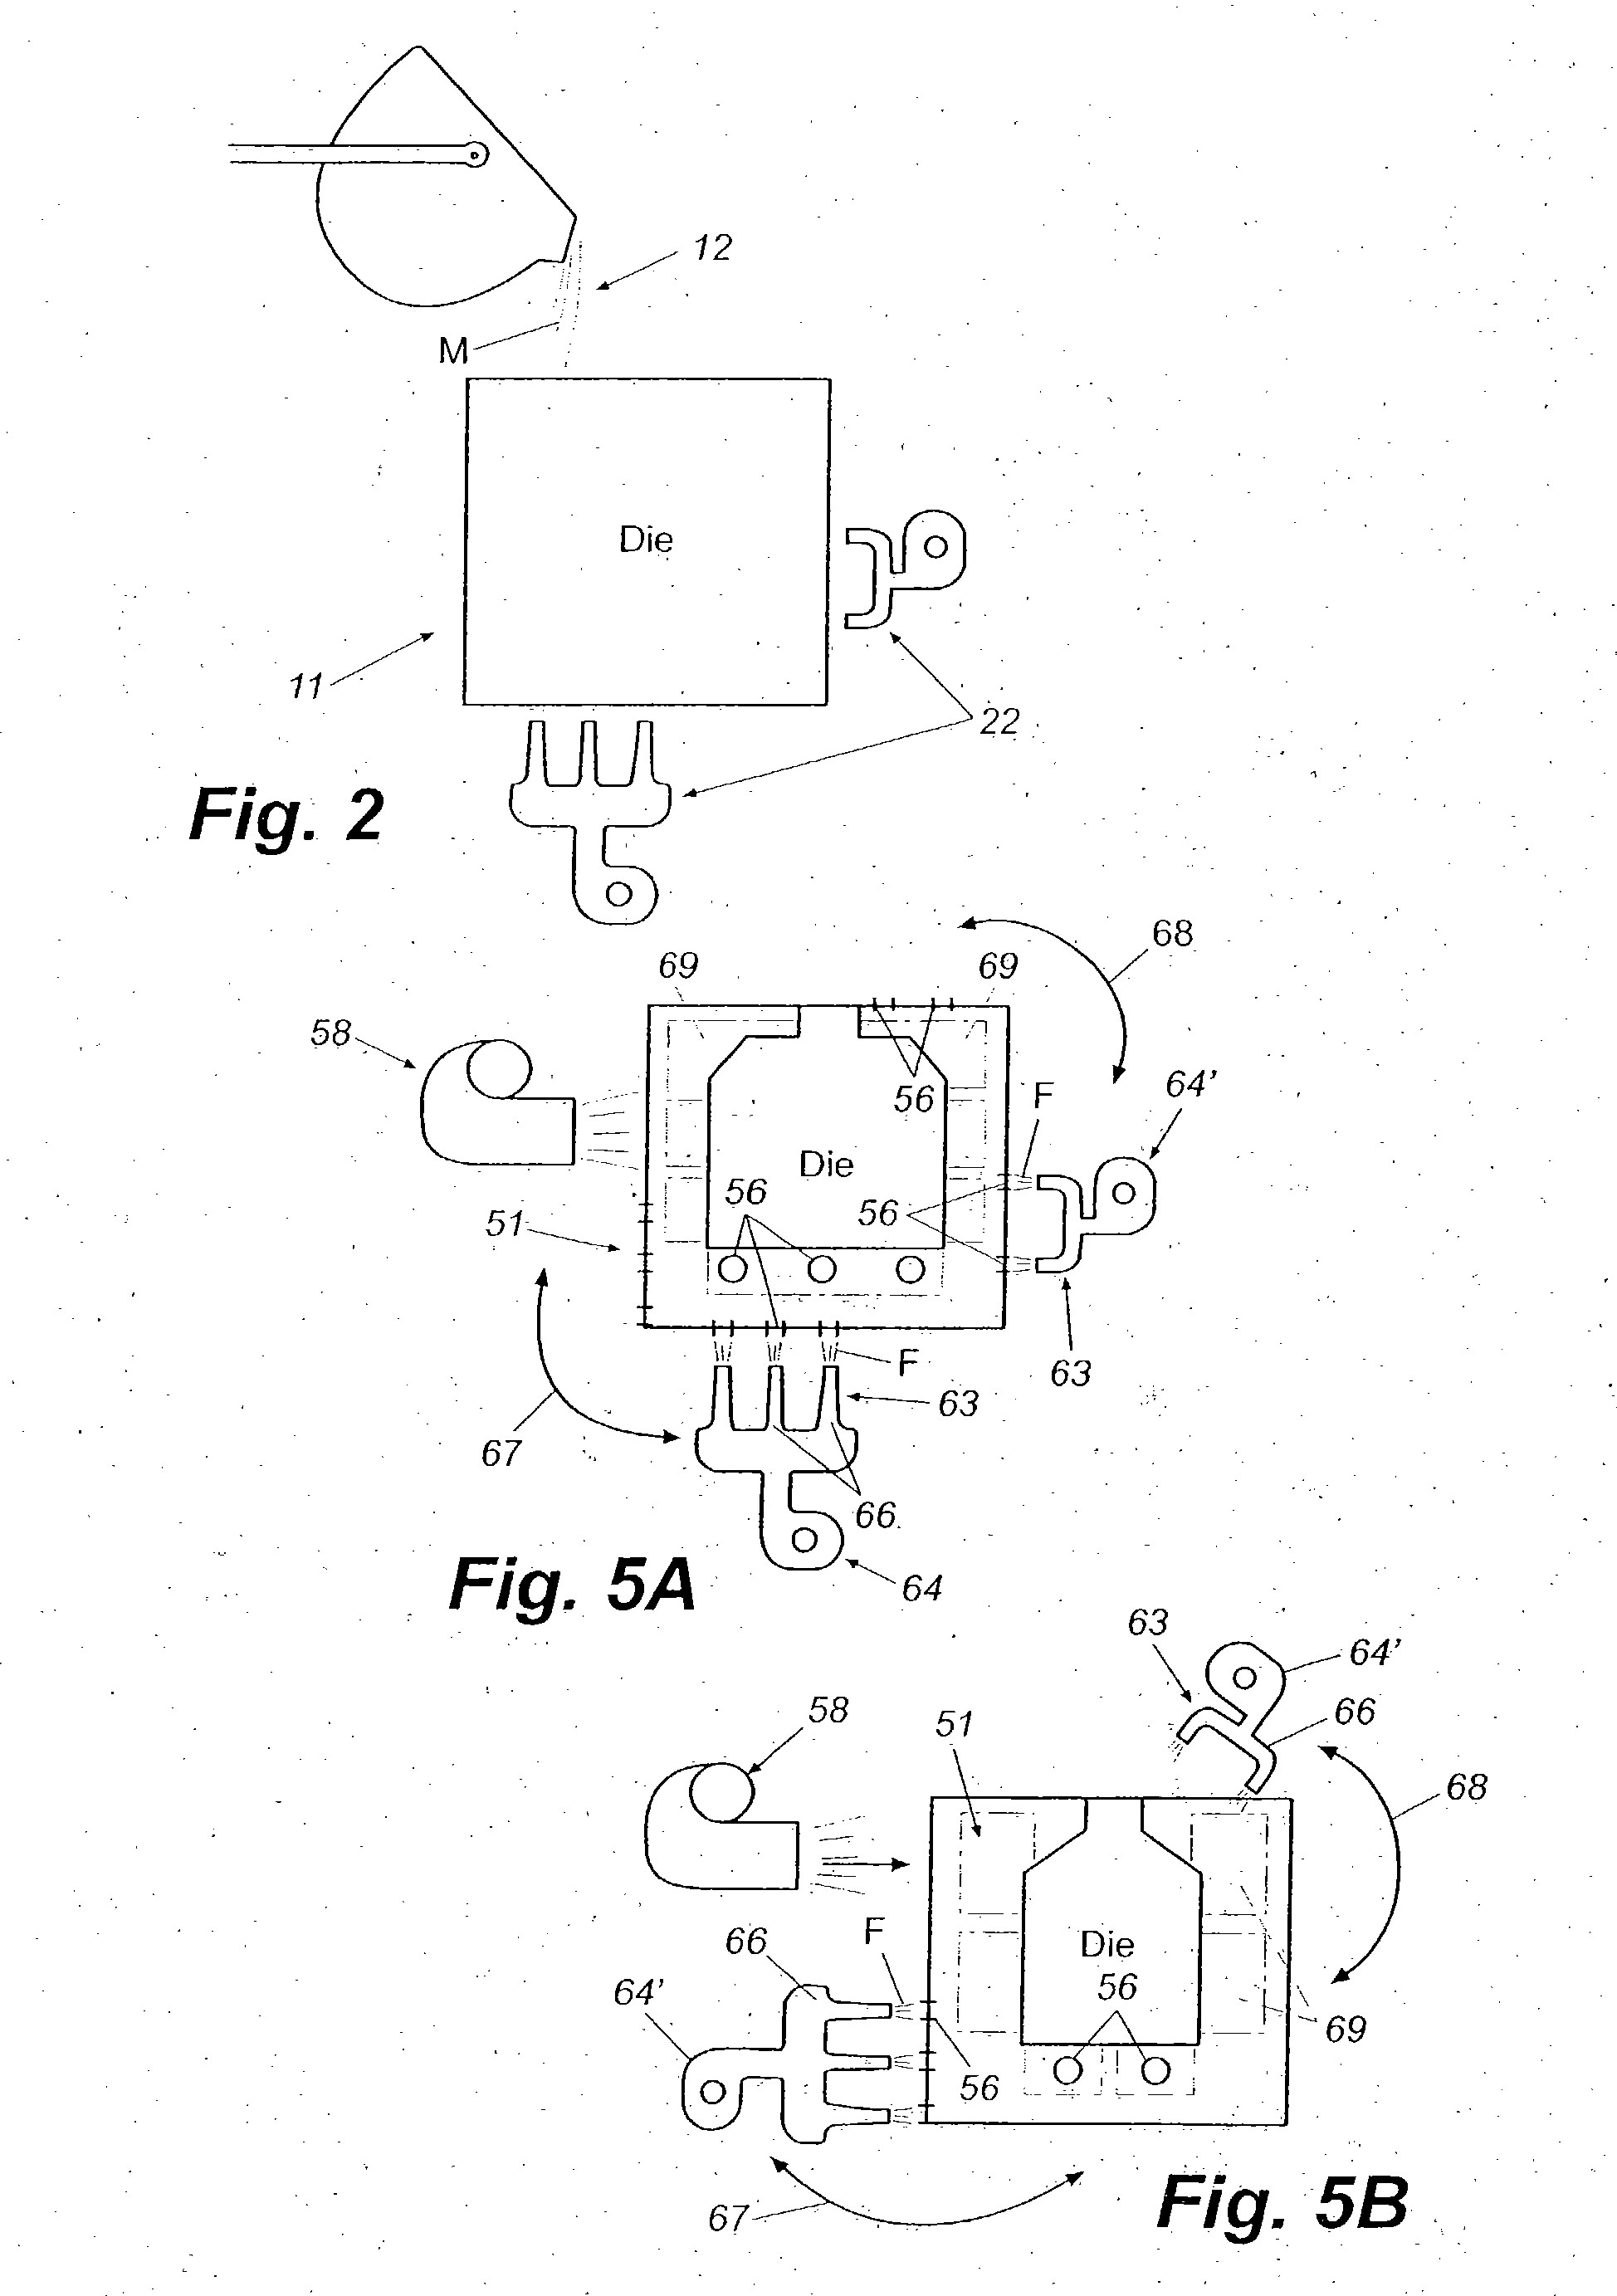 Methods and apparatus for heat treatment and sand removal for castings